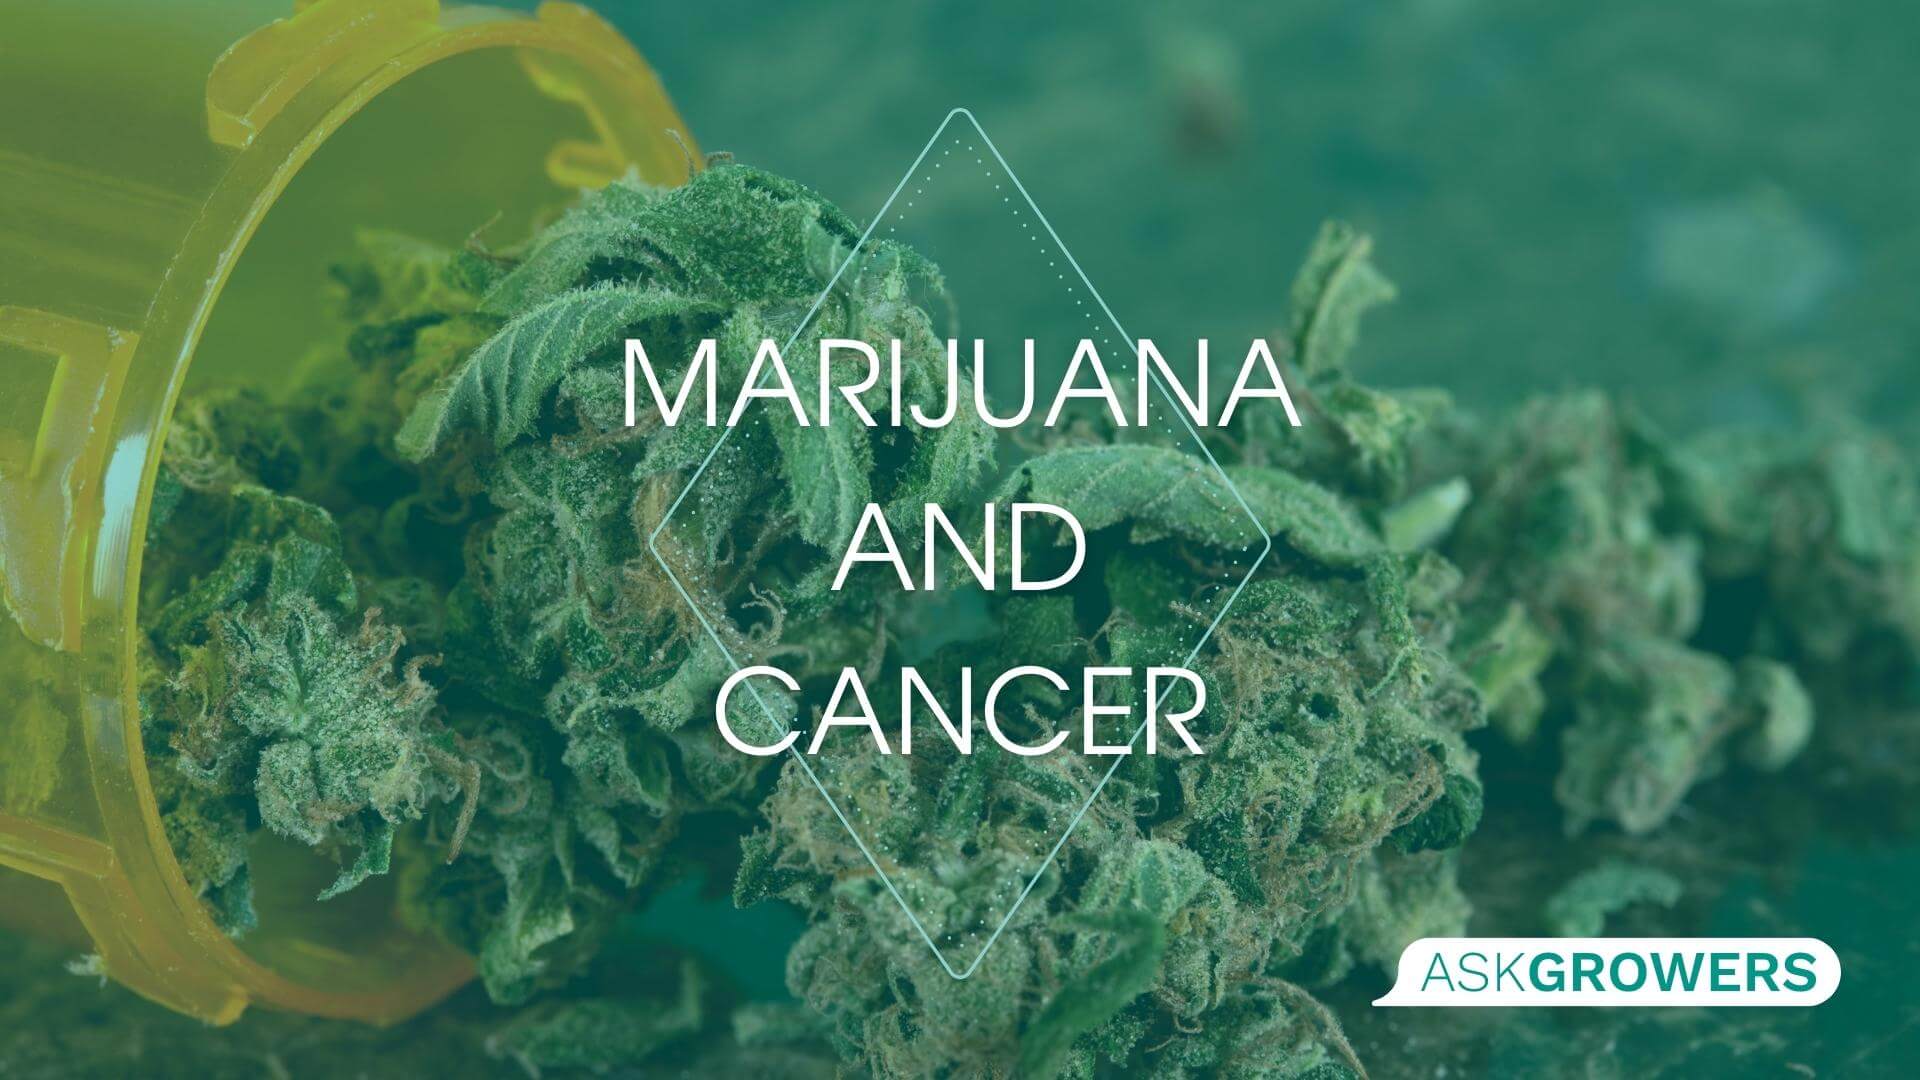 Can Marijuana Reduce Symptoms of Cancer or Even Treat It?